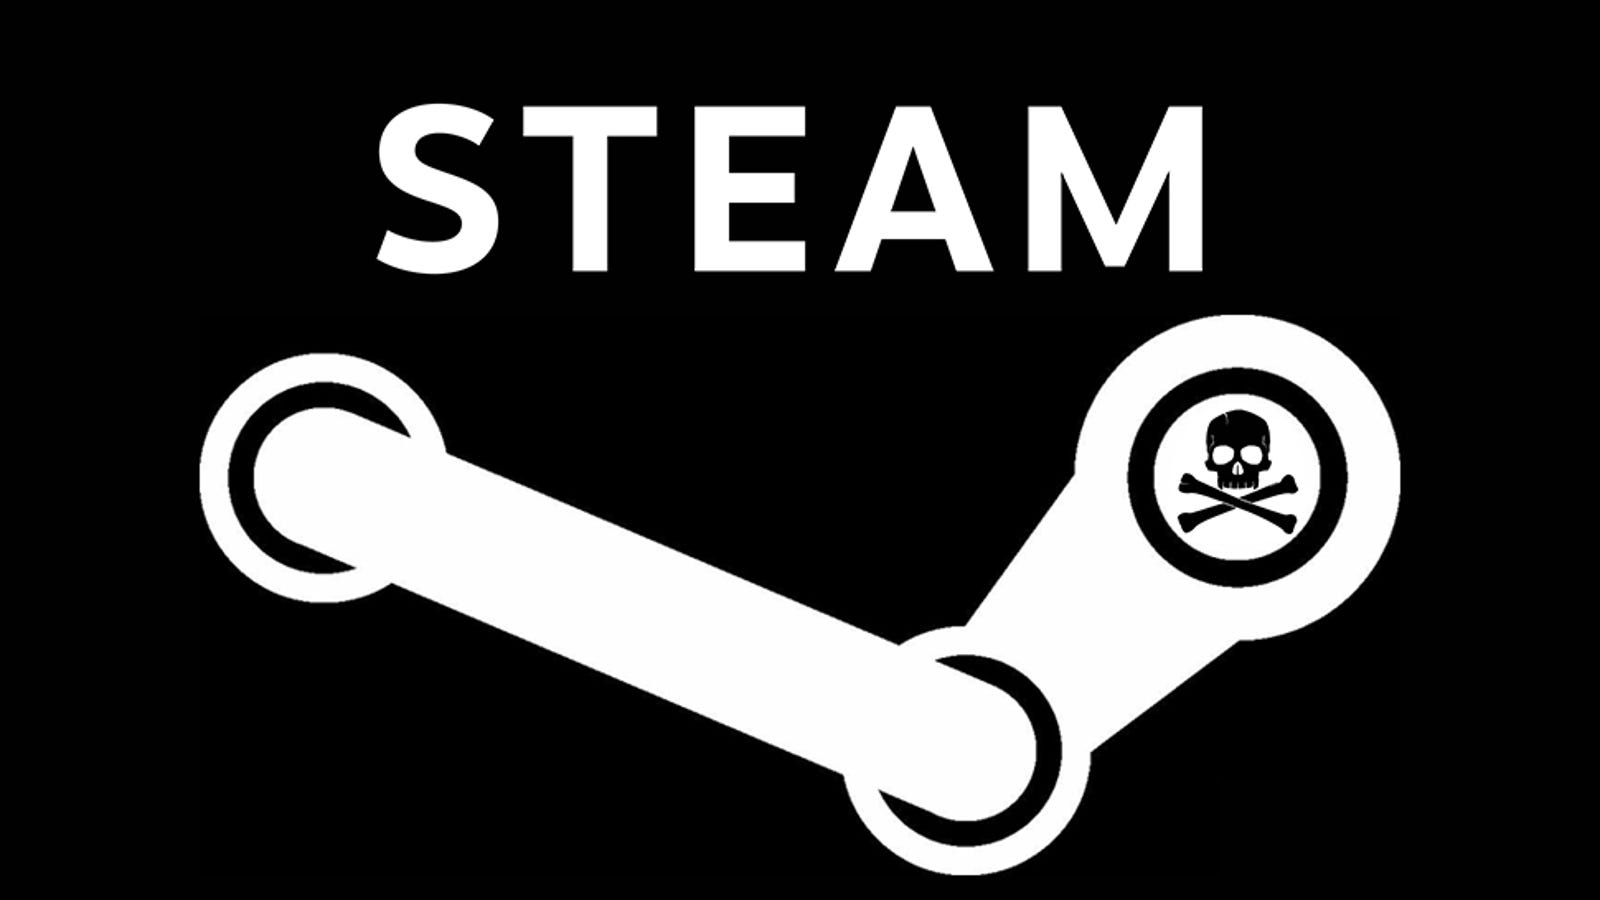 Can find user on steam фото 83